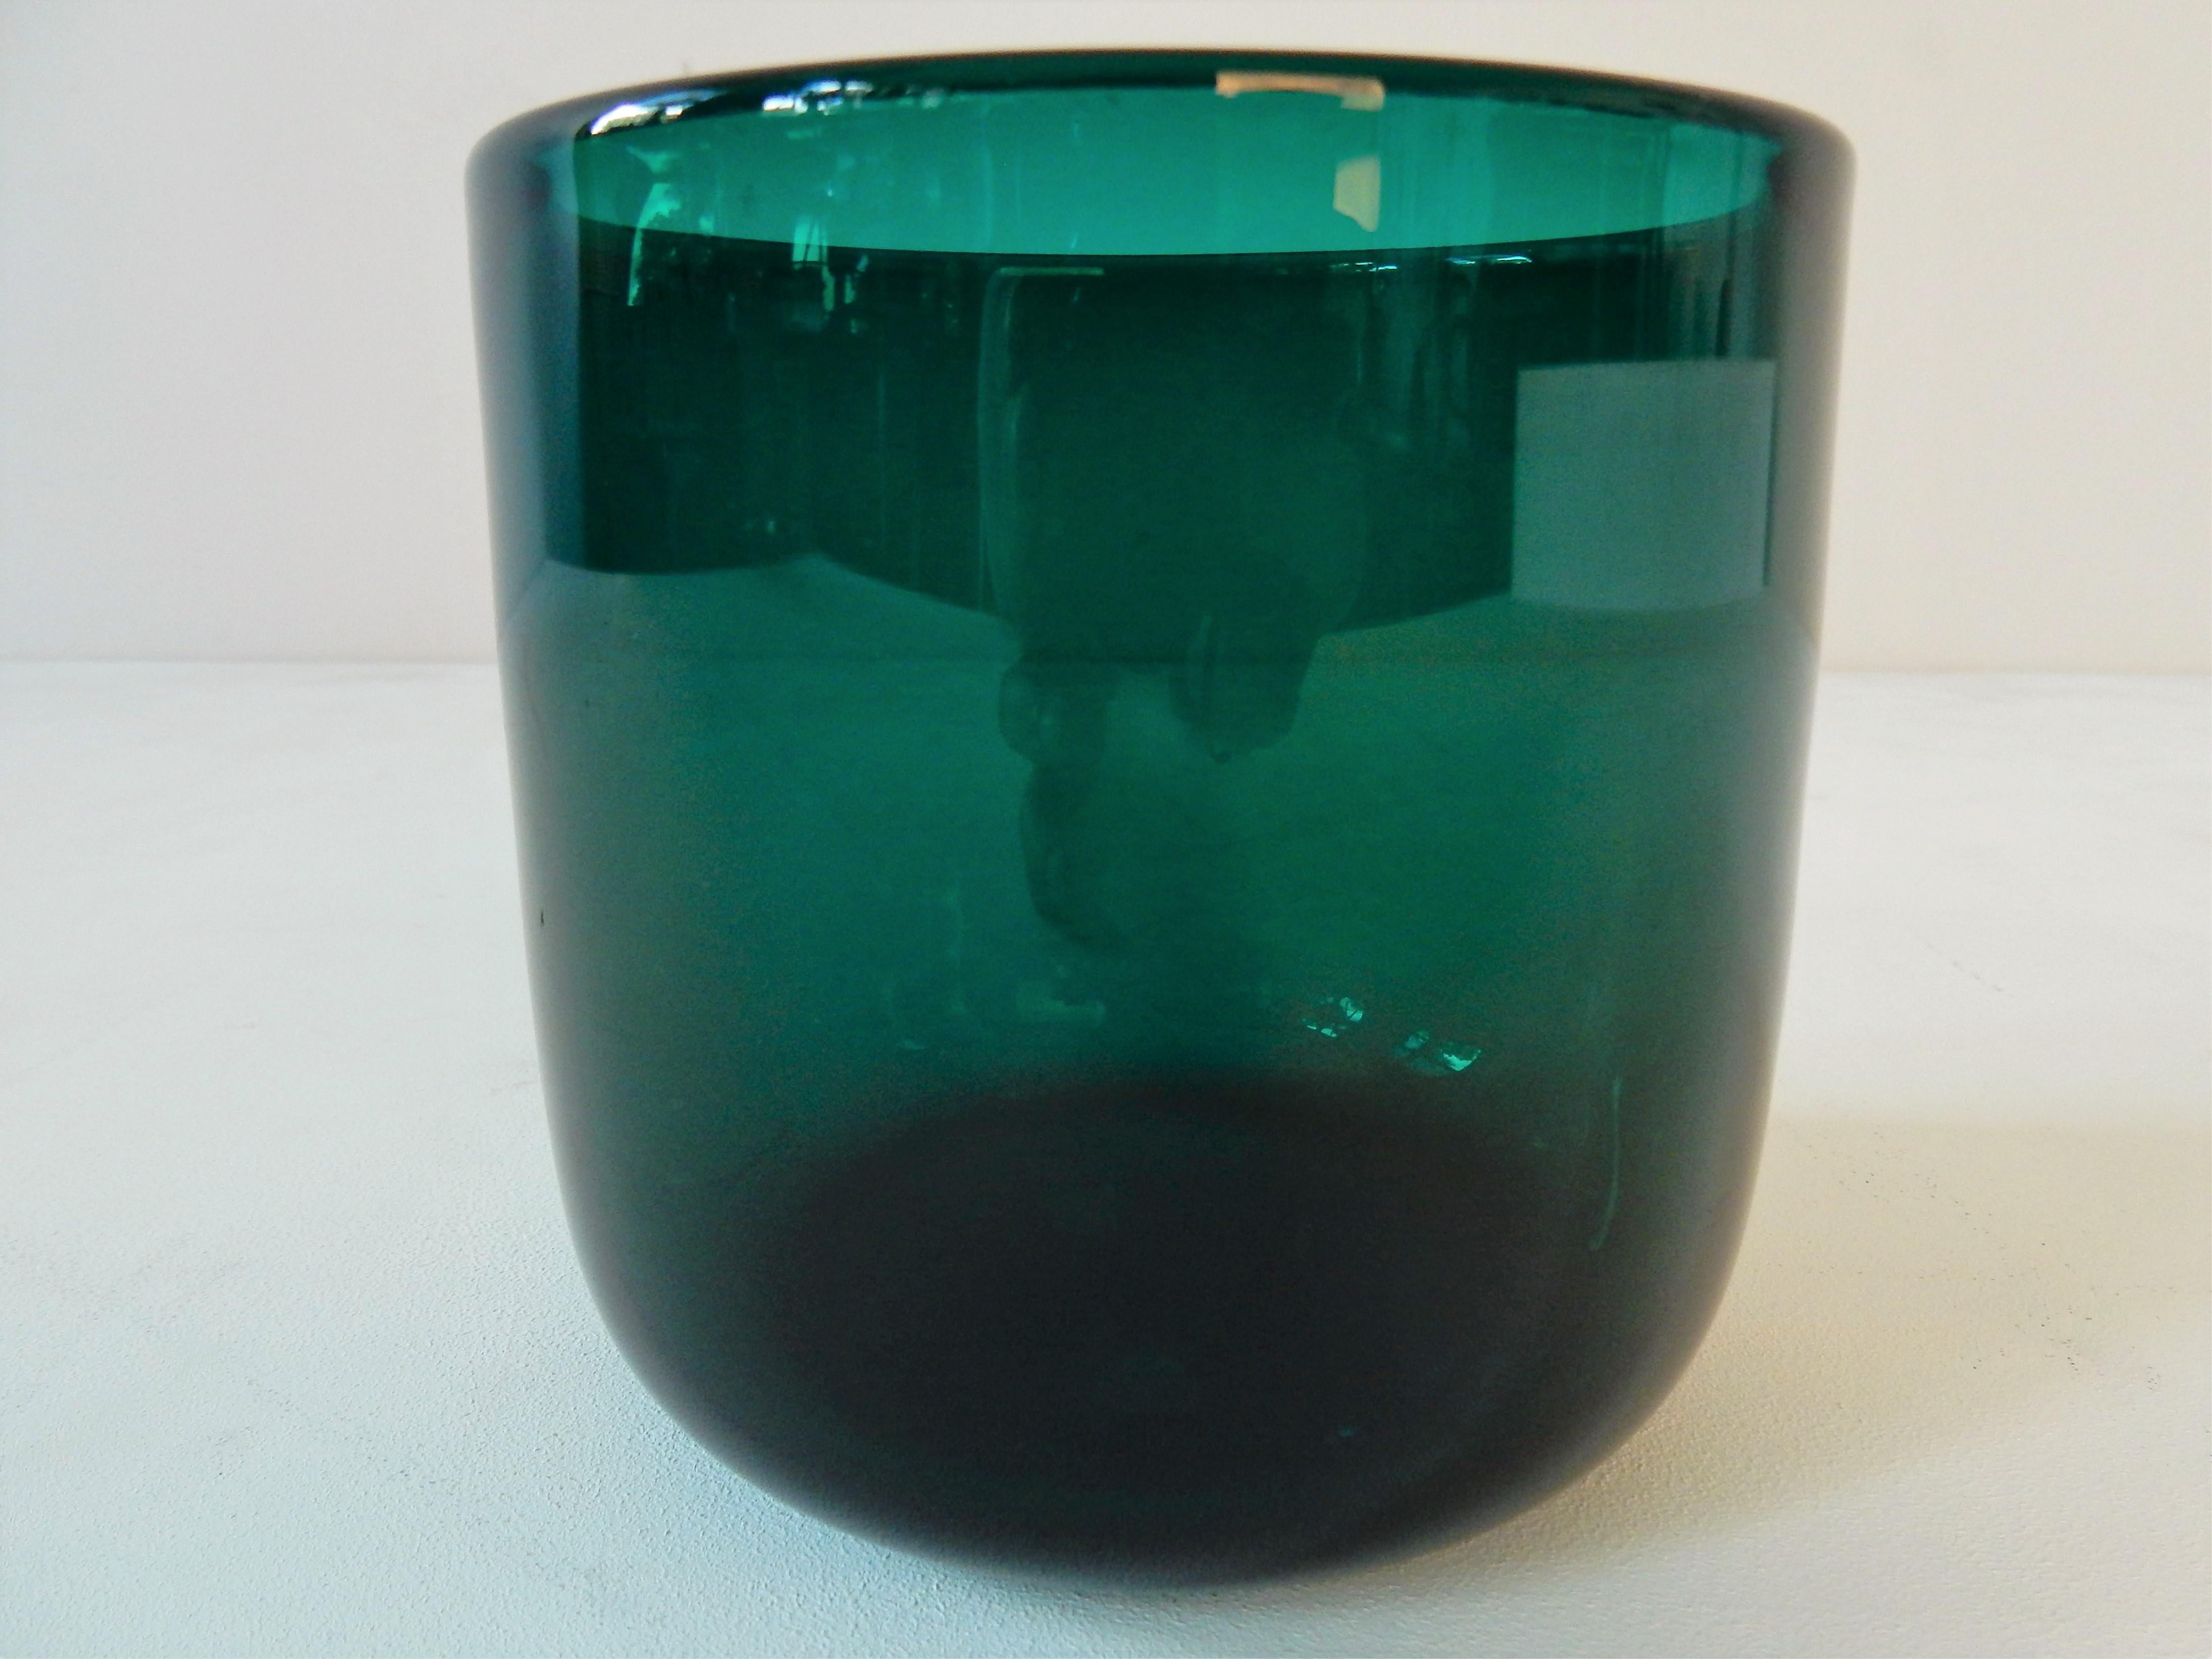 This beautiful turquoise green Grønland (Greenland) flowerpot, was designed by Per Lütken for Holmegaard in 1961. It is marked and signed on the bottom. It has a minor defect to a spot on the top, no chip but maybe a small fabrication fault.